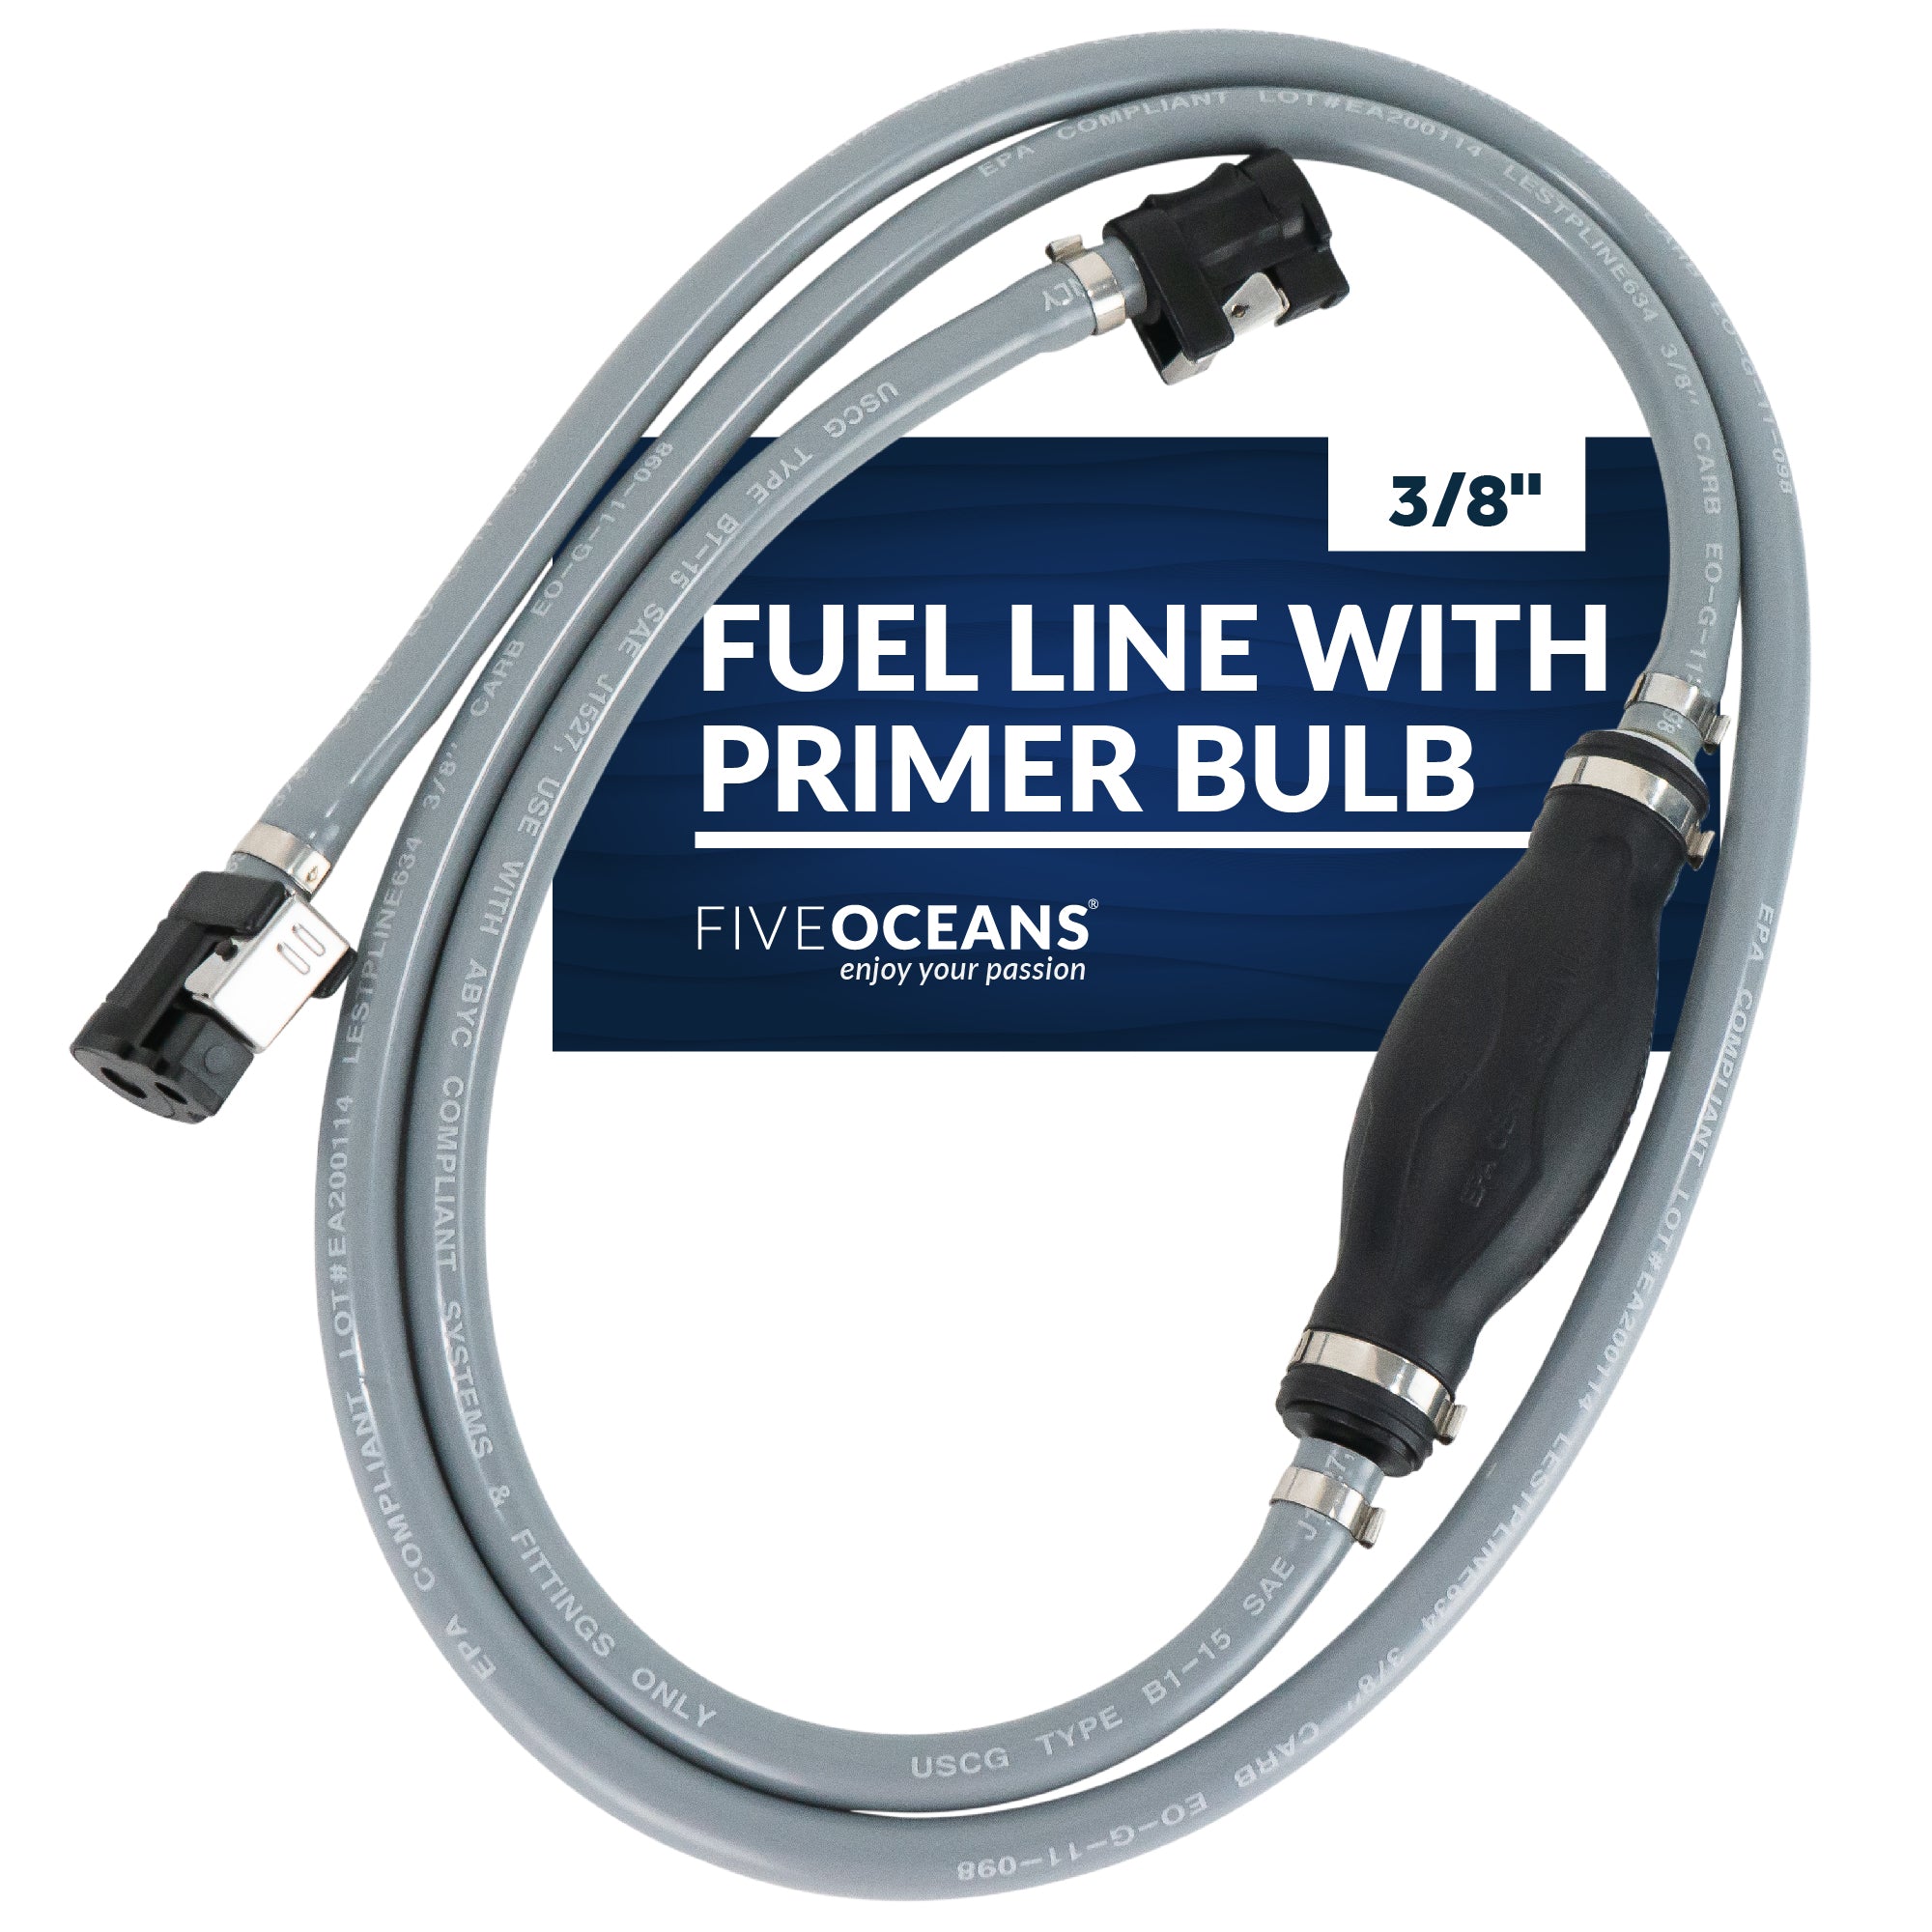 3/8" Outboard Motor Fuel Line with Primer Bulb for Yamaha/Mercury, 6' Long, EPA/CARB - FO4285